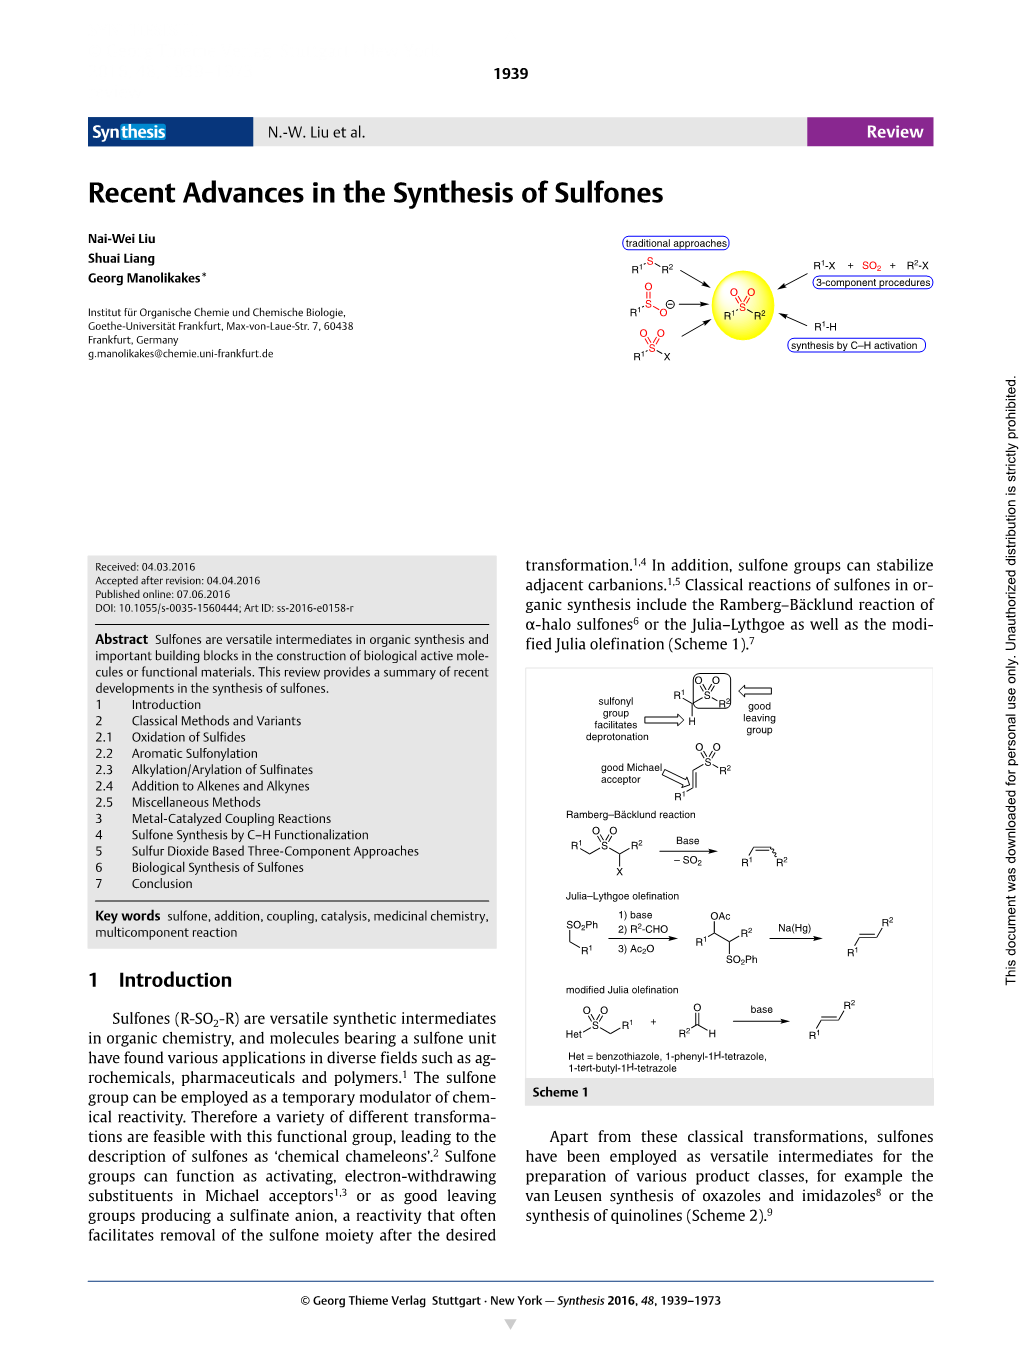 Recent Advances in the Synthesis of Sulfones